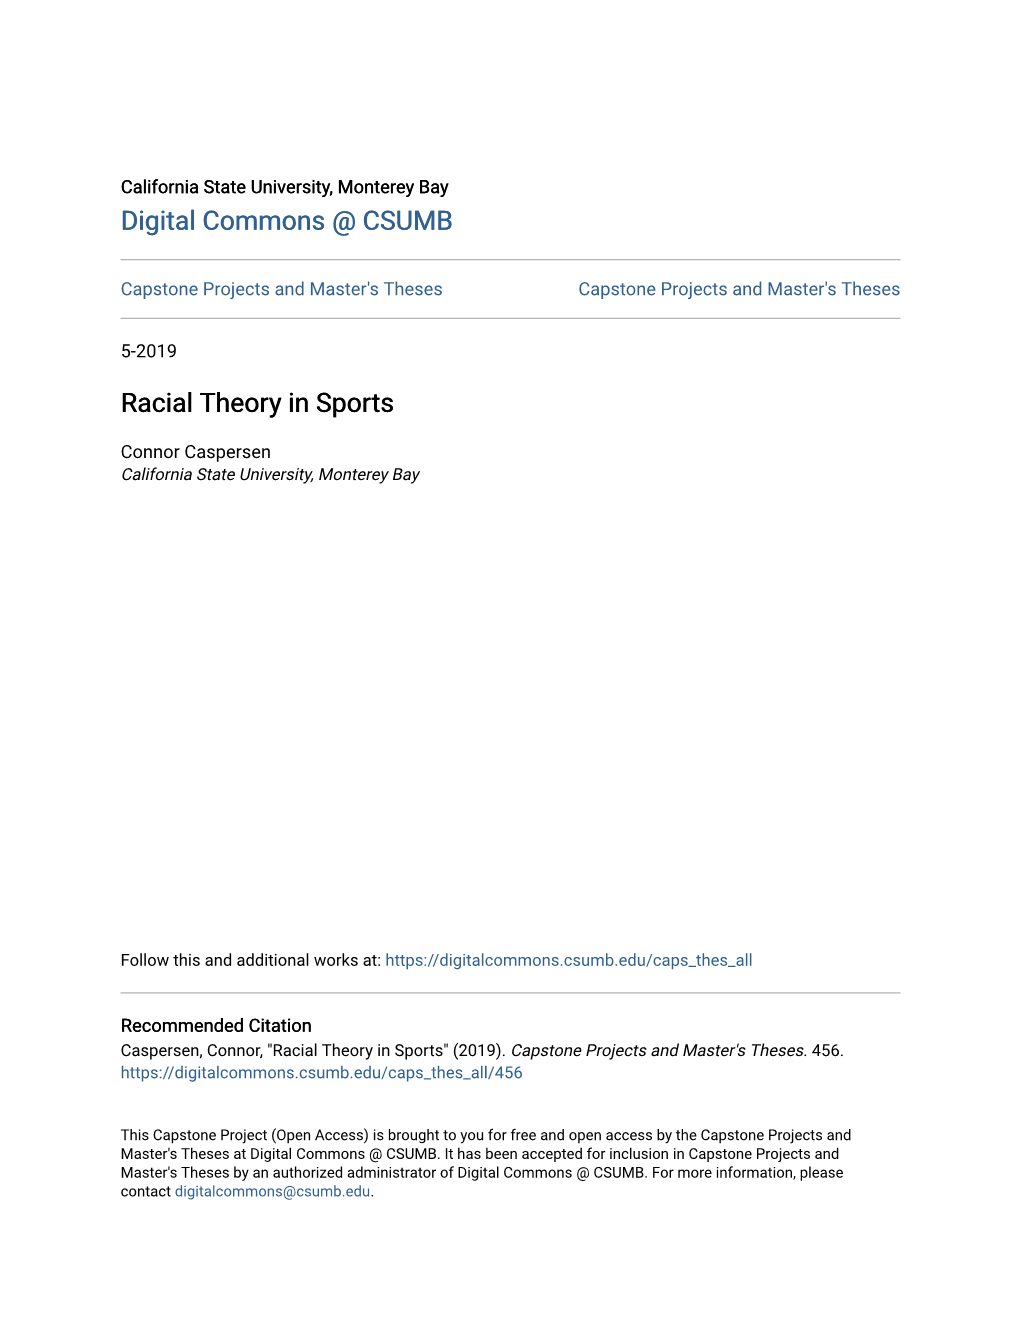 Racial Theory in Sports